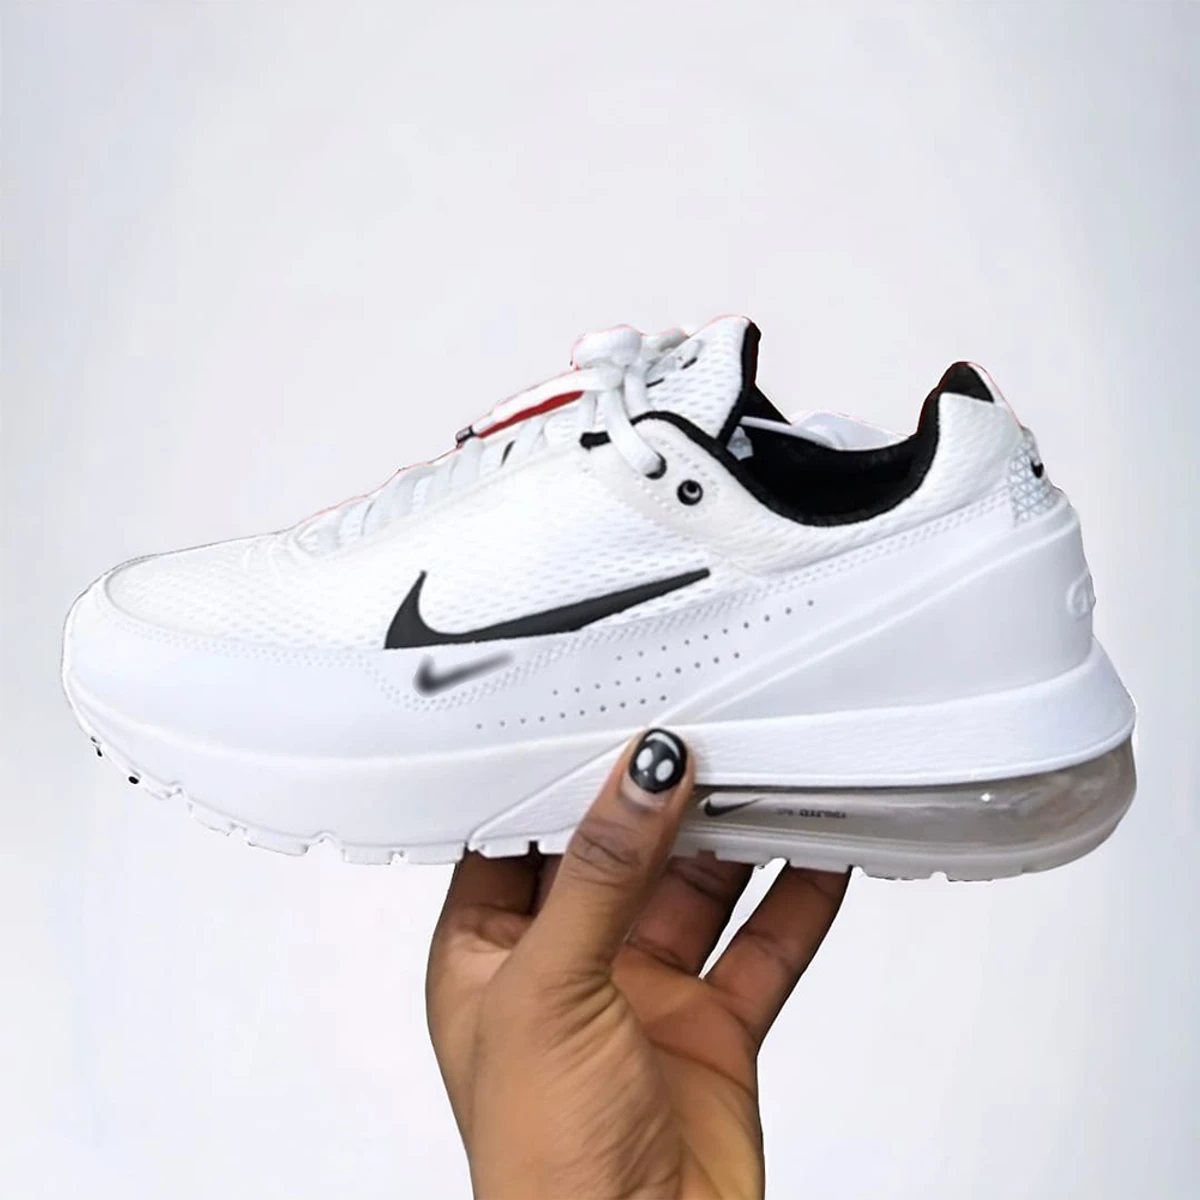 Air Max Pulse PU Leather Running Shoes For Men - OME Grade - White - WAMP-105